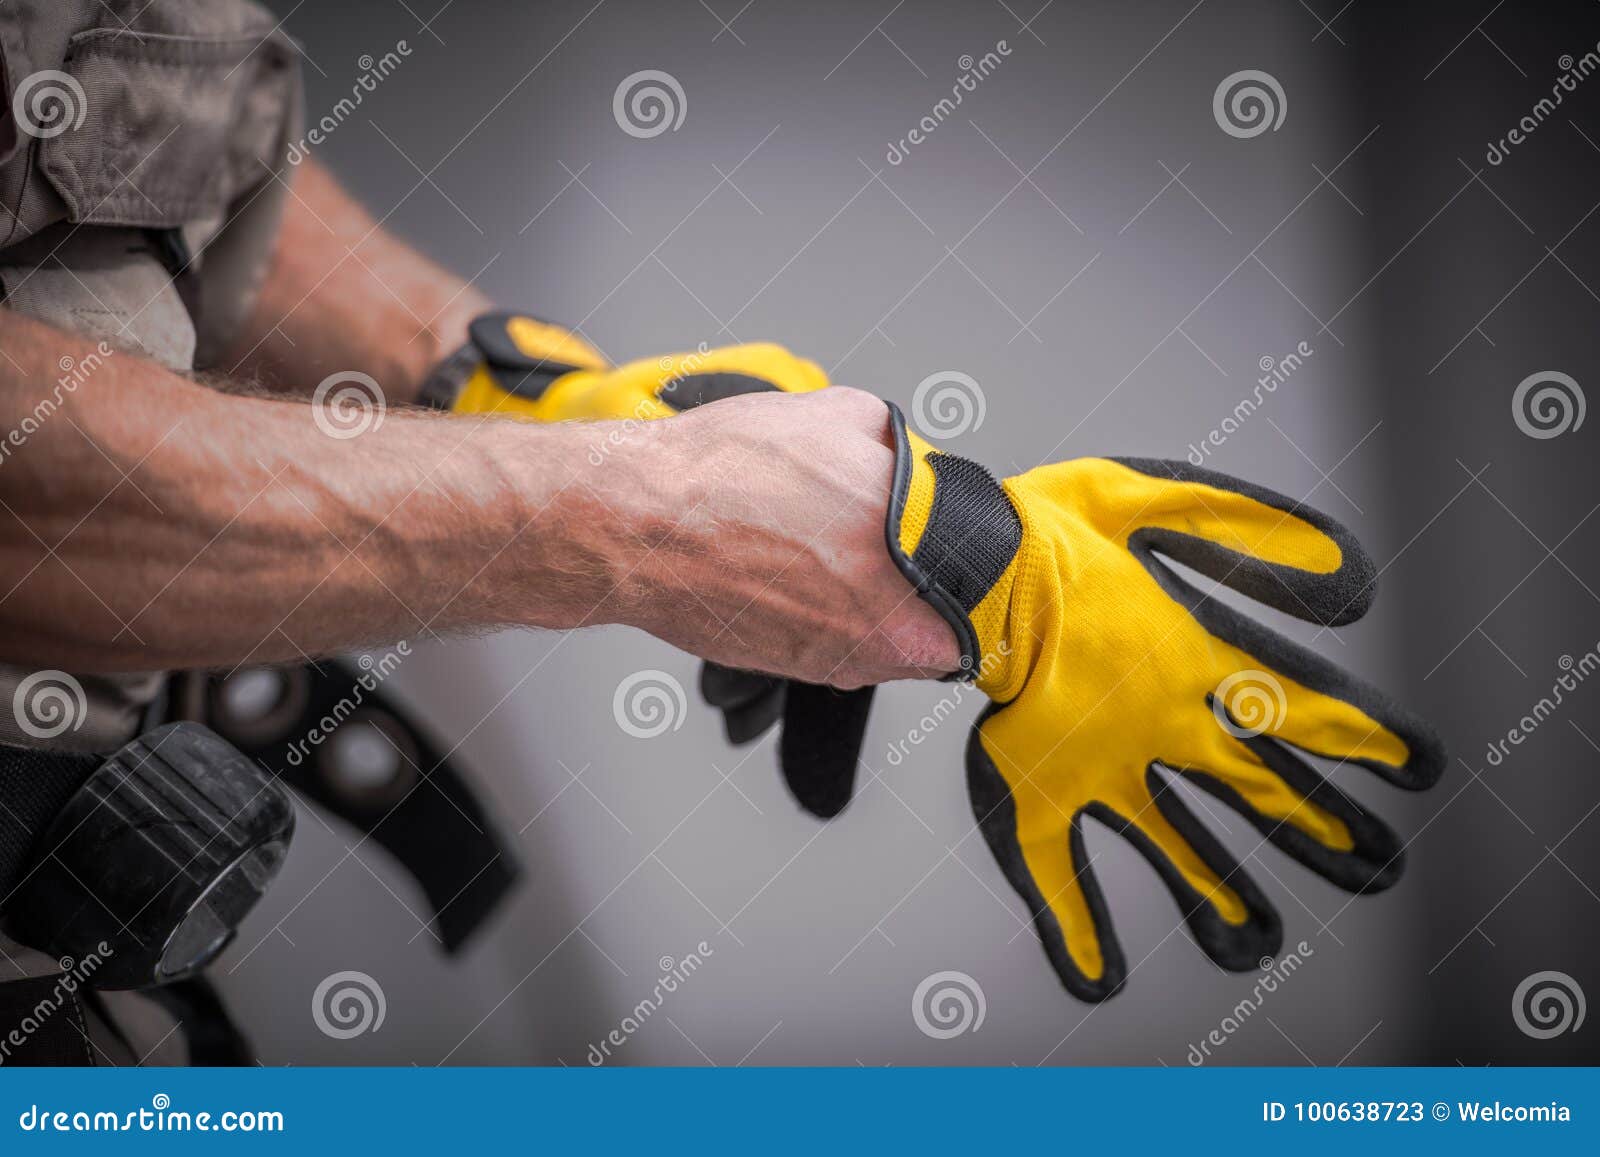 wearing safety gloves